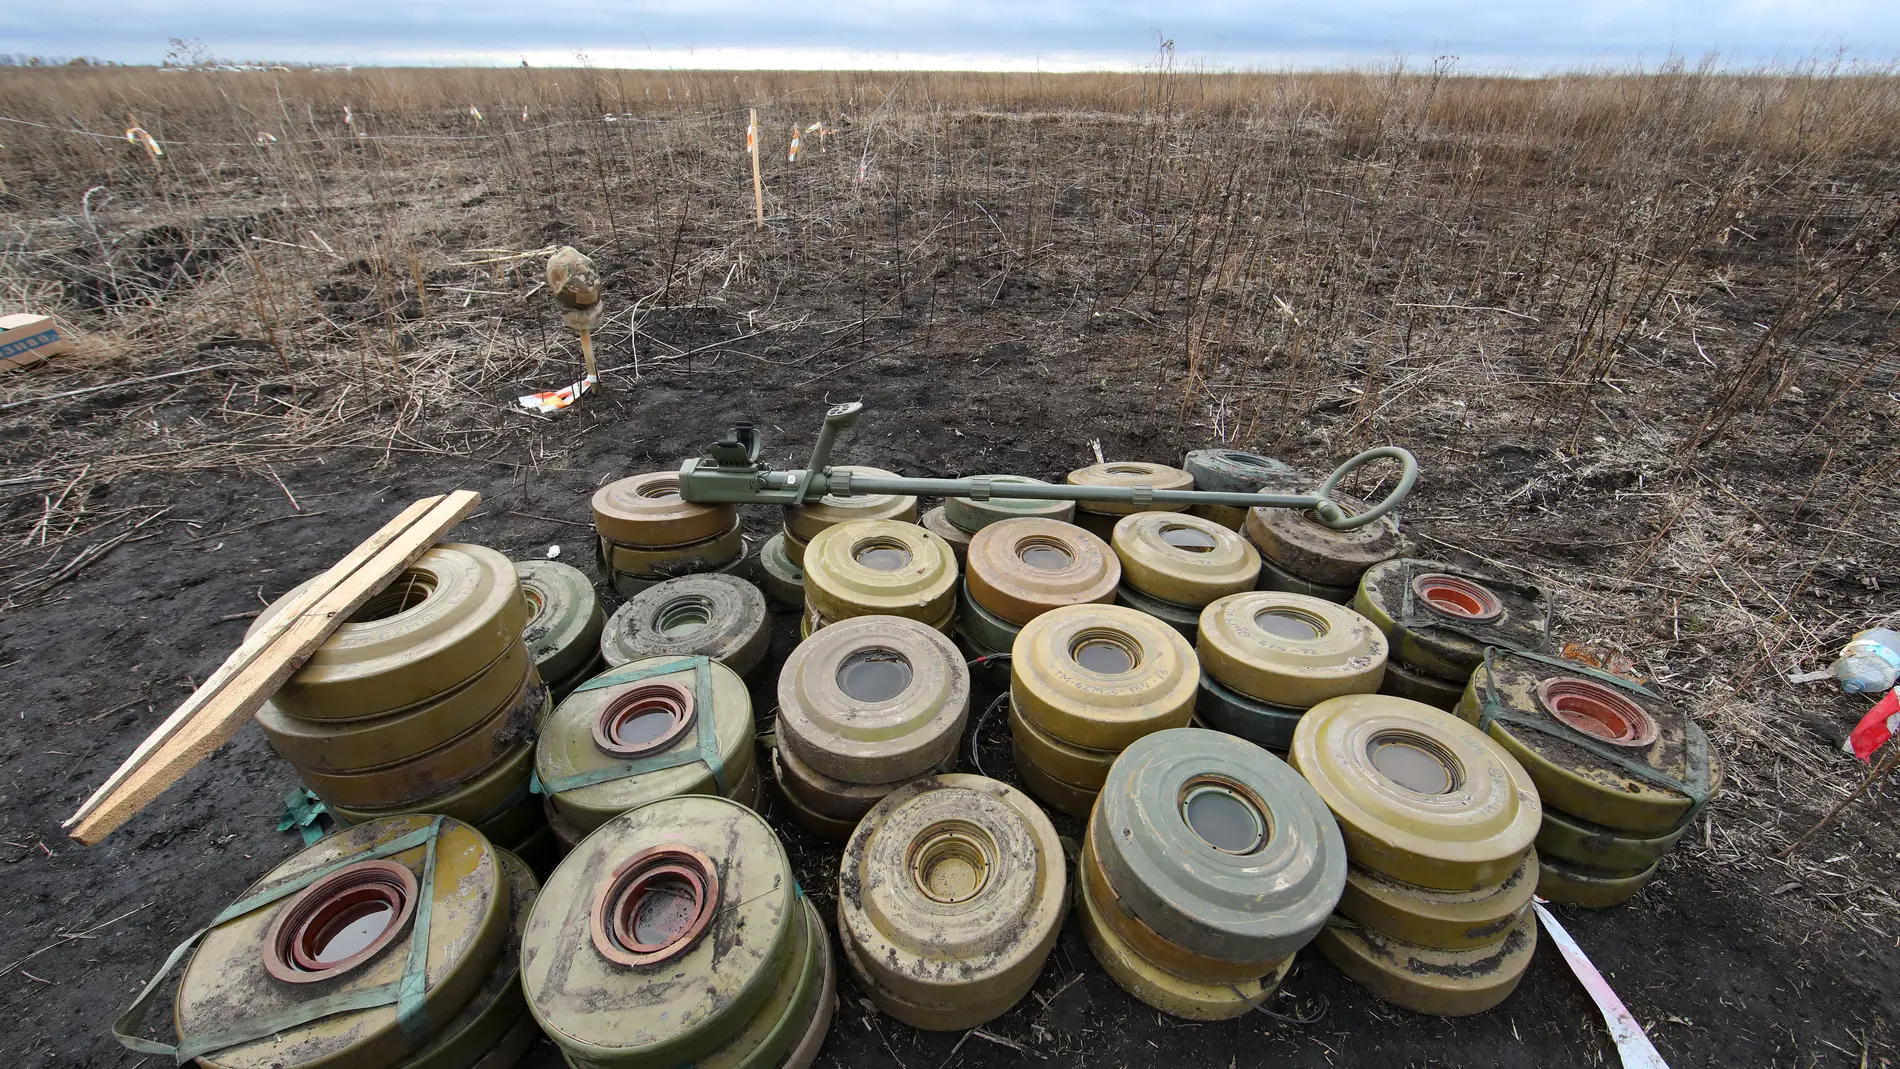 October 24, 2023, Kharkiv Region, Ukraine: KHARKIV REGION, UKRAINE - OCTOBER 24, 2023 - Anti-tank mines found by a consolidated squad of the Explosives Service of Ukraine are stacked on the ground during demining works in Kharkiv Region, northeastern Ukraine. (Foto de ARCHIVO) 24/10/2023